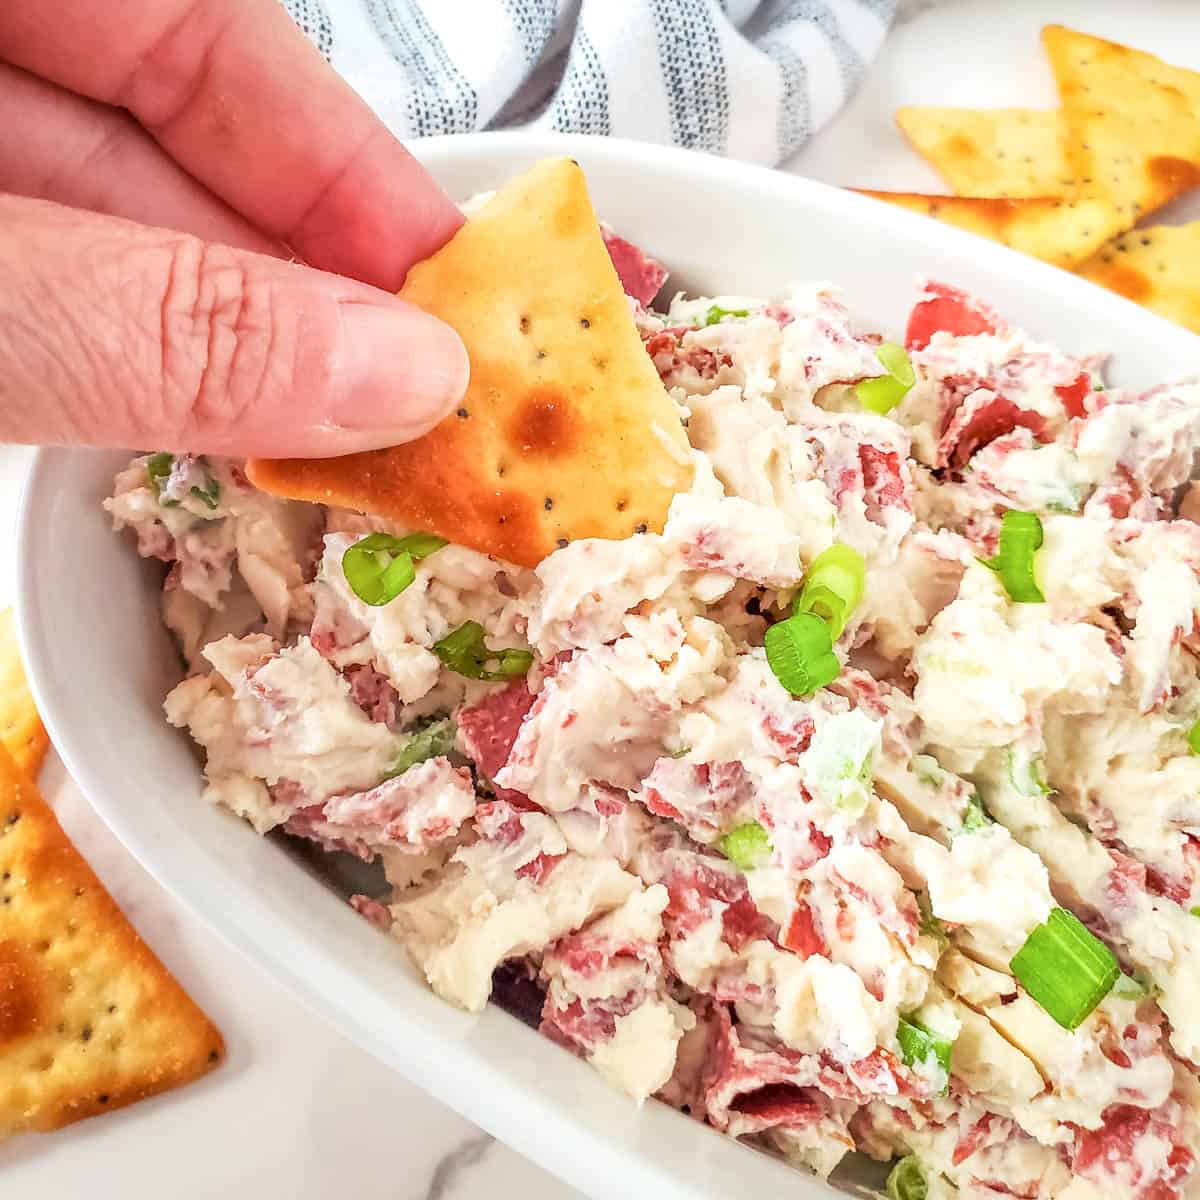 Dipping a piece of cracker in cream cheese dried beef dip.